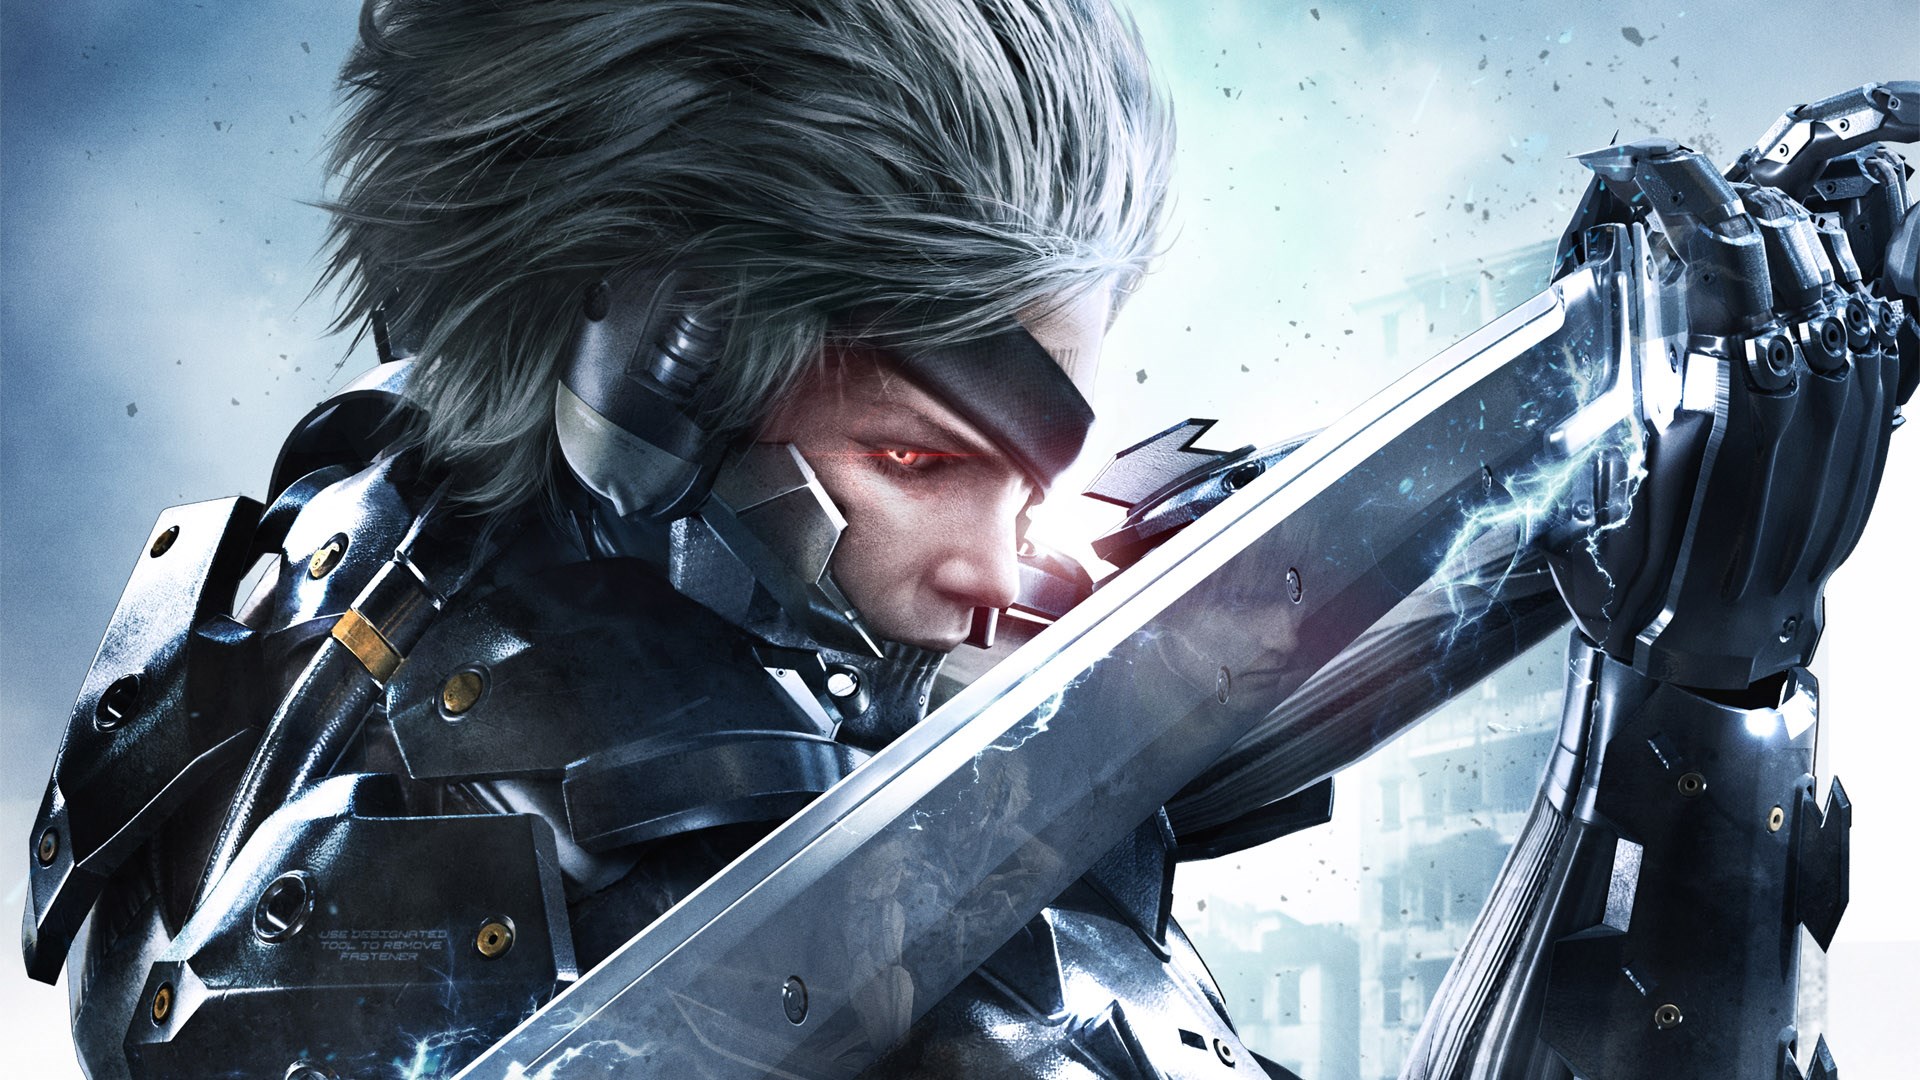 Metal Gear Rising: Revengeance APK Download Latest Version For Android